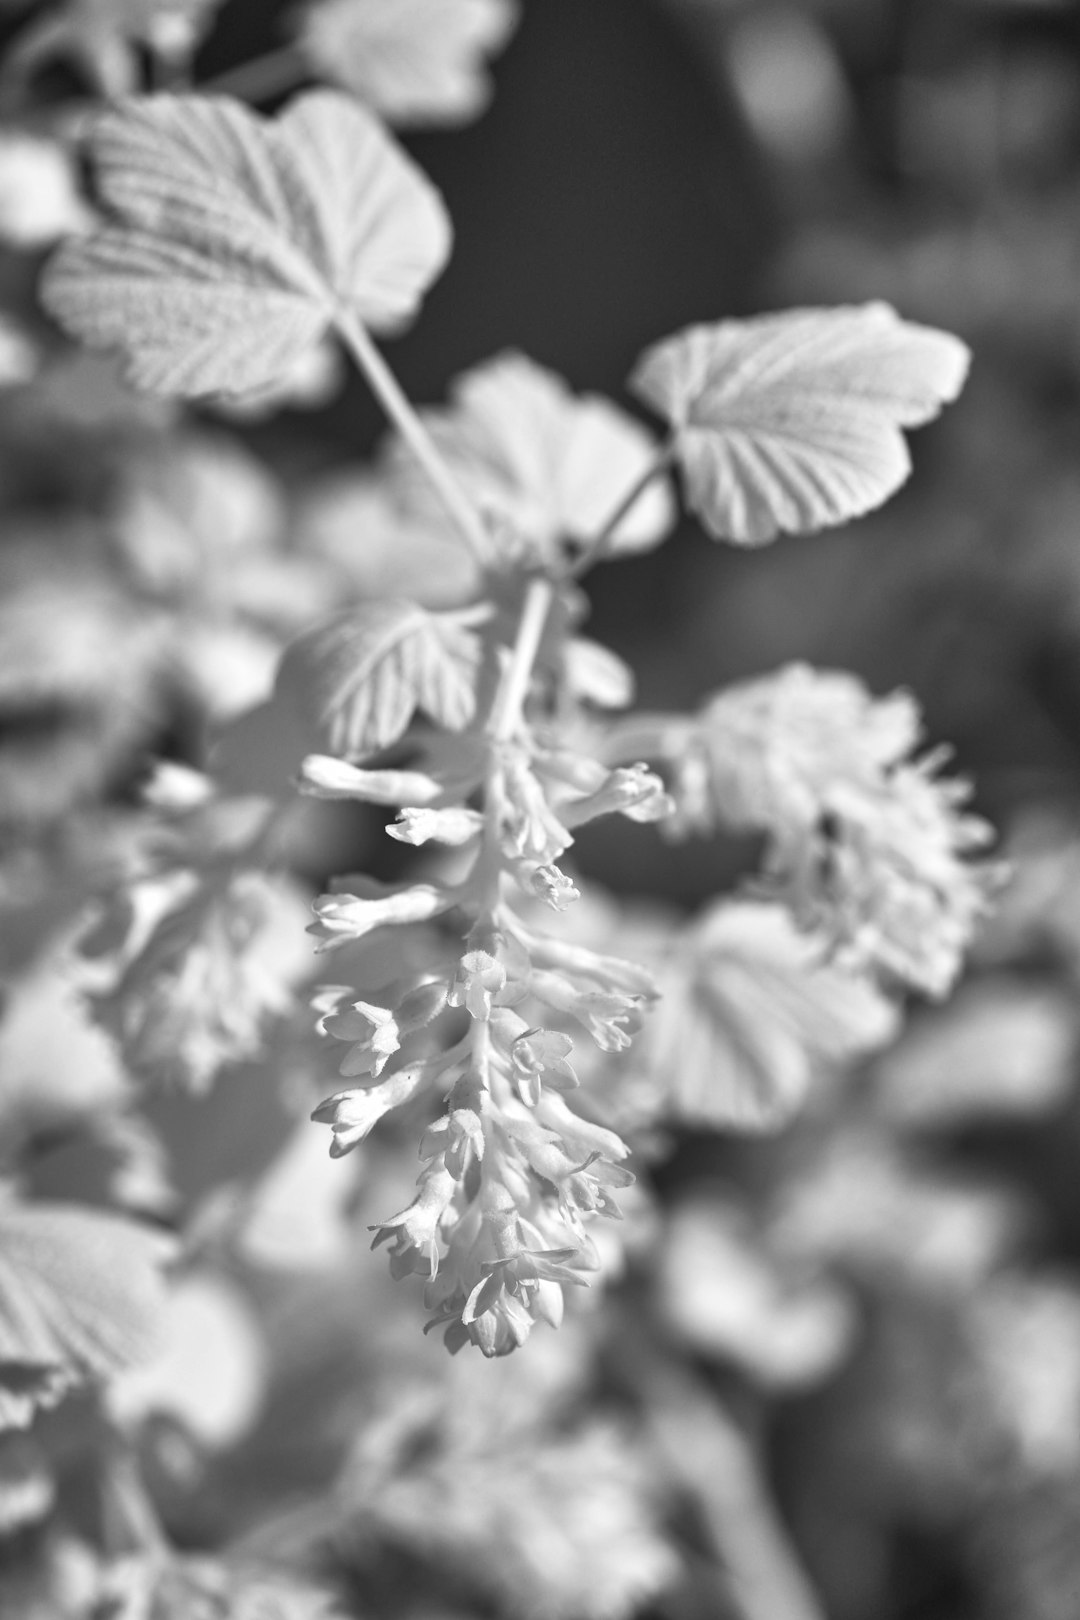 grayscale photo of white flowers